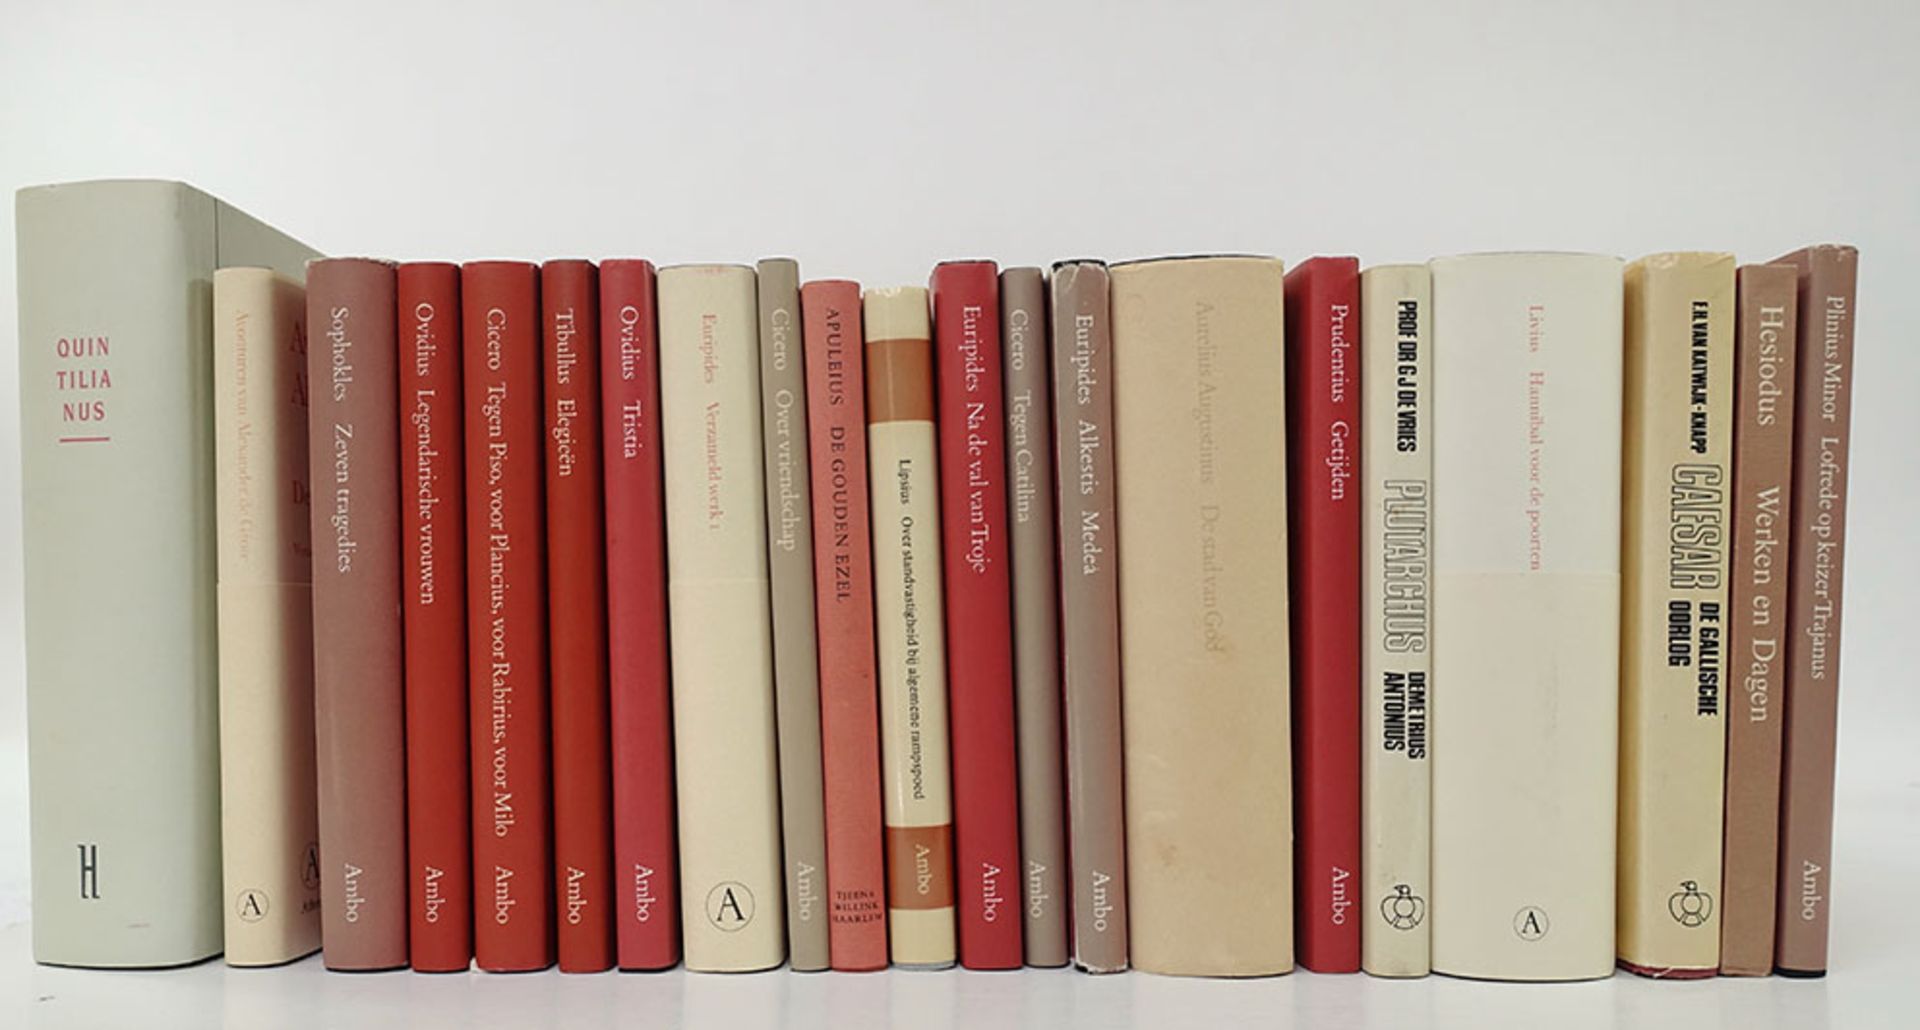 COLLECTION of classical works in Dutch translation. (1971-2001). 21 vols. Or. binds. (20) w. dust-